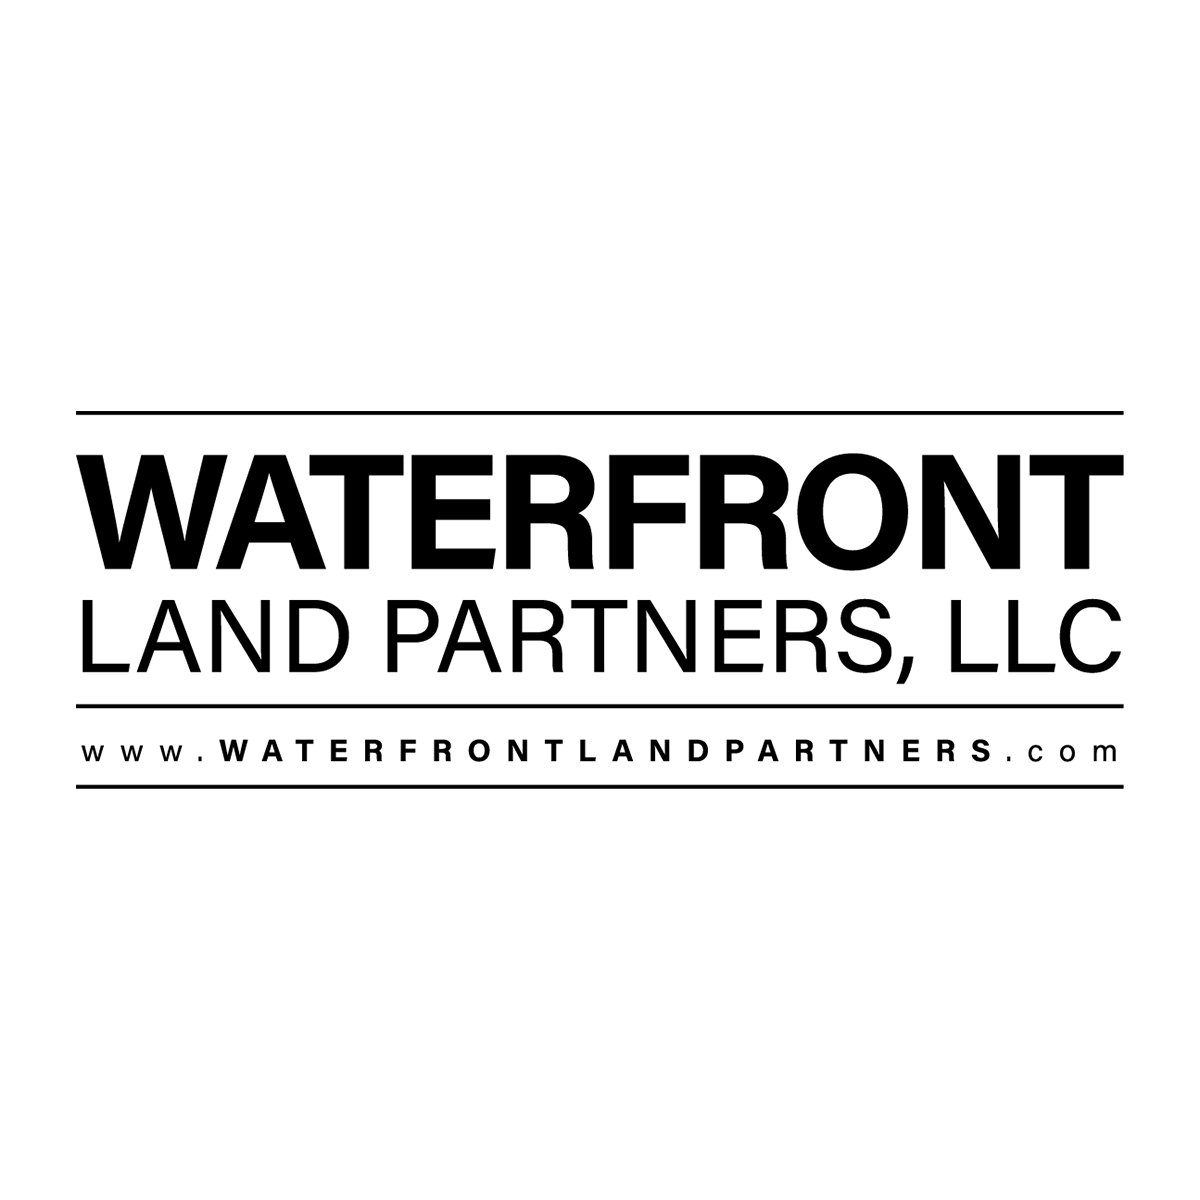 Welcome to Waterfront Land Partner’s LLC professional land marketing and development company.